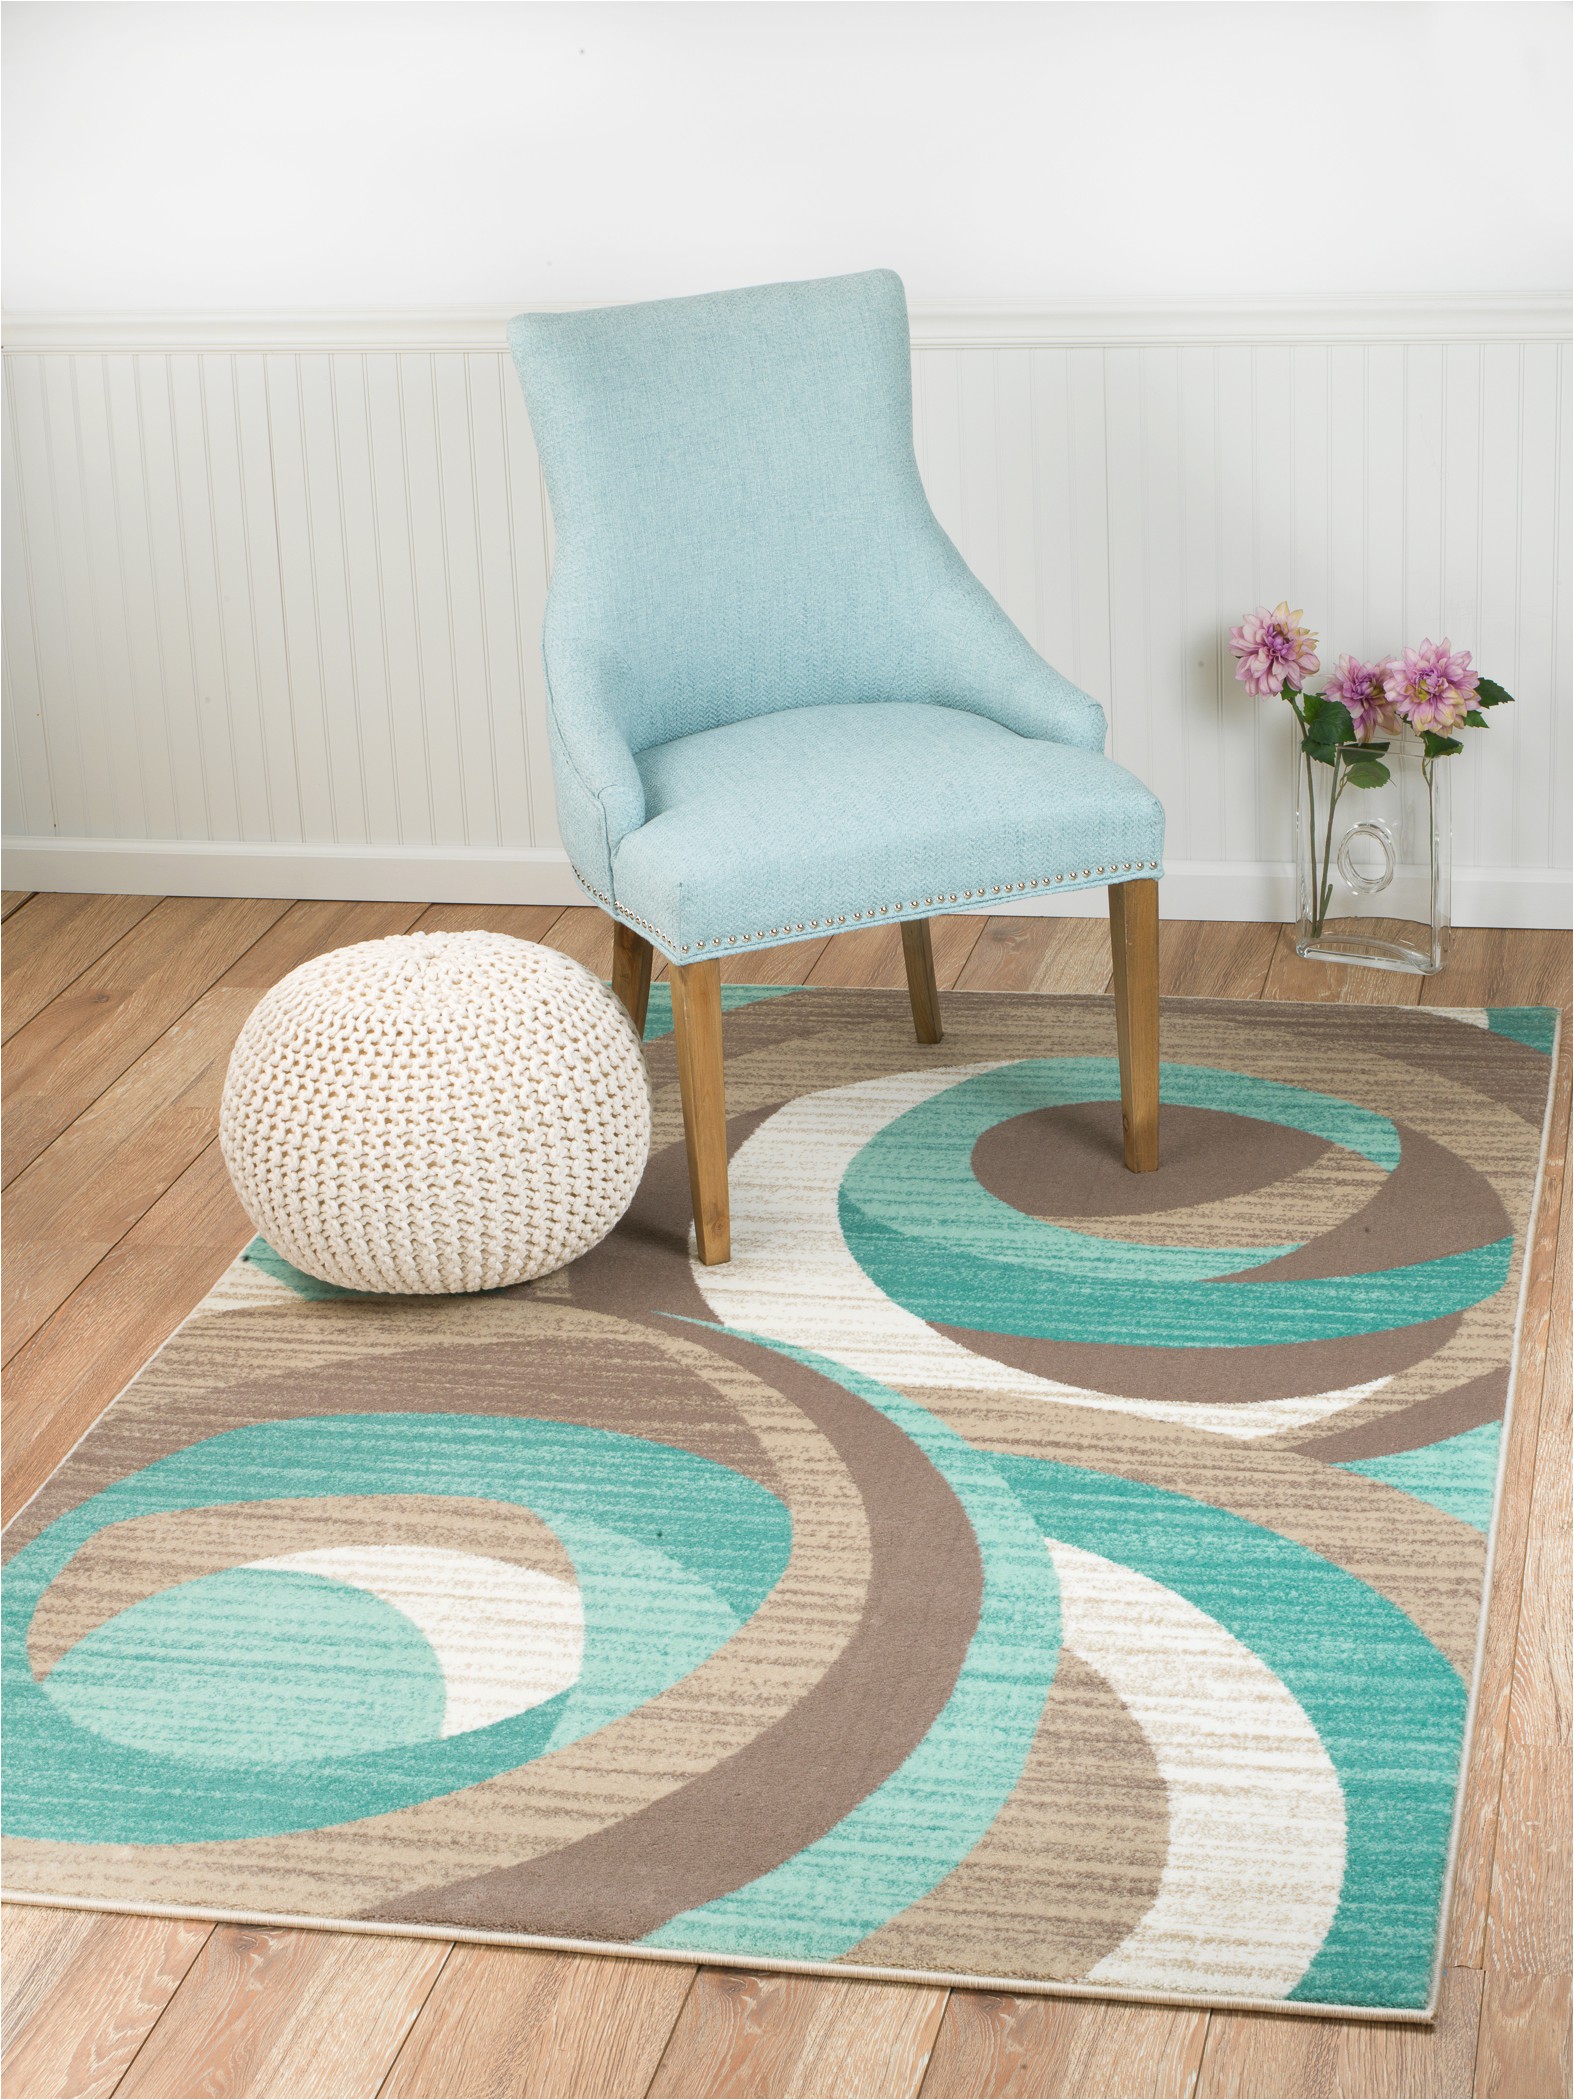 Cheap 5 by 7 area Rugs Summit Teal Taupe Abstract area Rug 5 X 7 Walmart